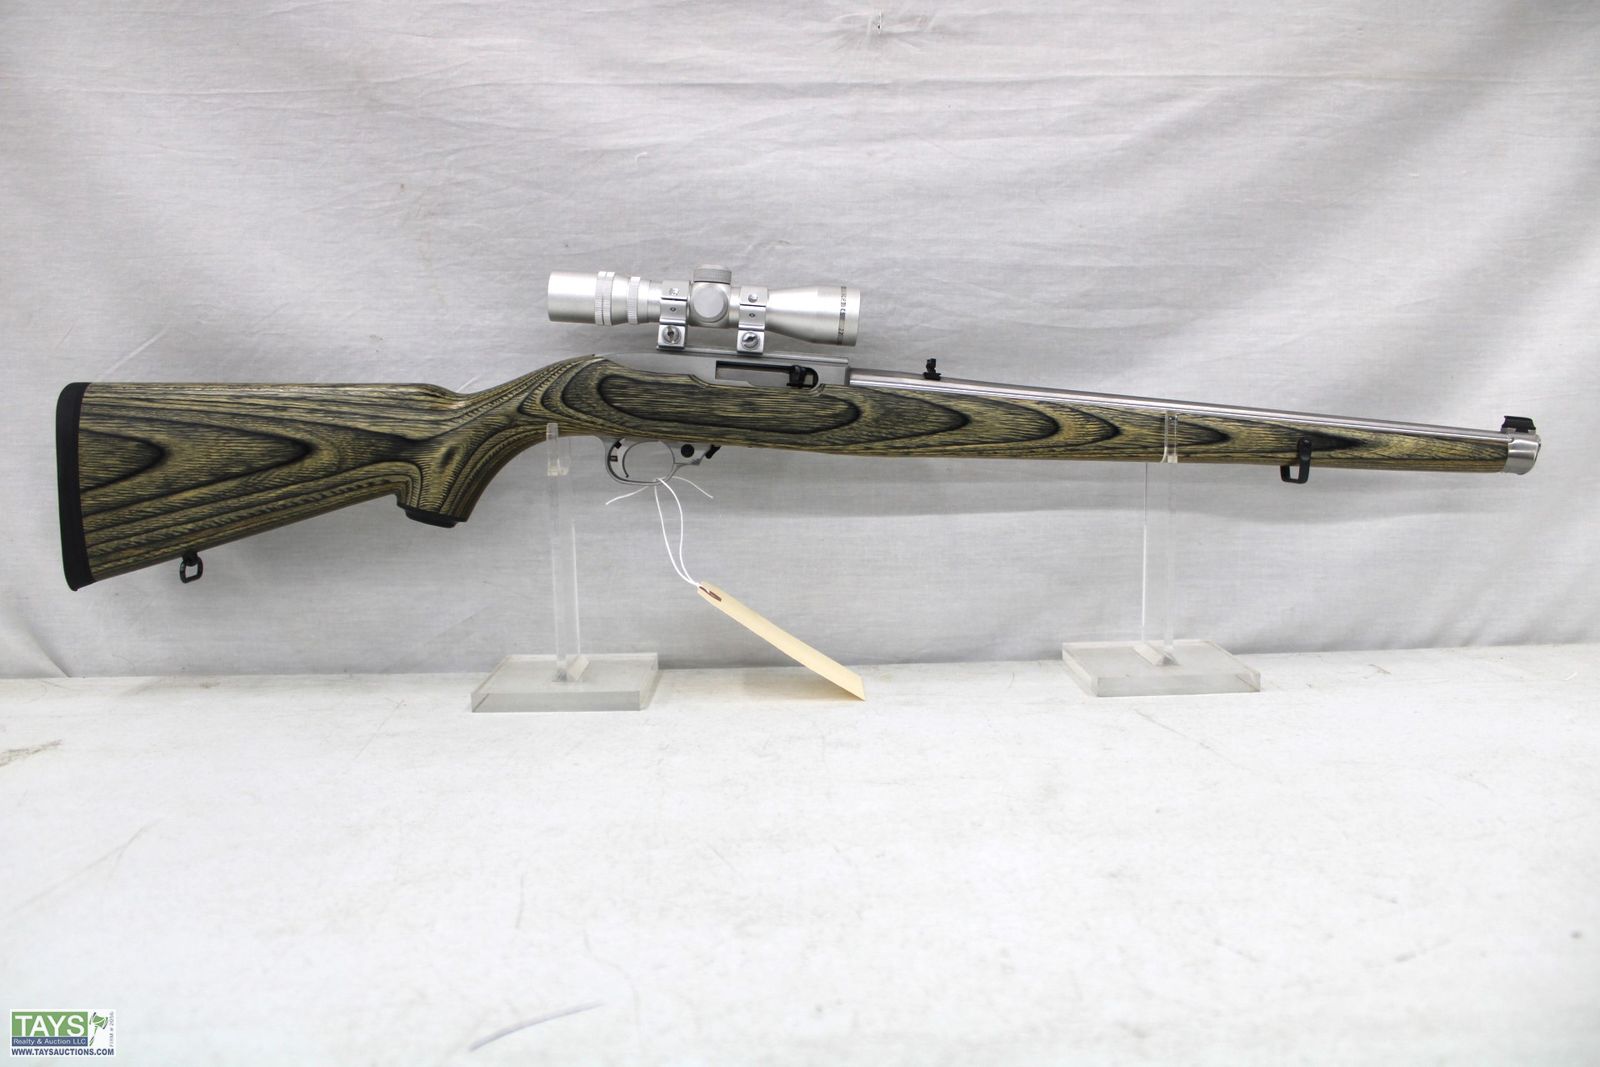 Tays Realty & Auction - Auction: ONLINE ABSOLUTE AUCTION: FIREARMS